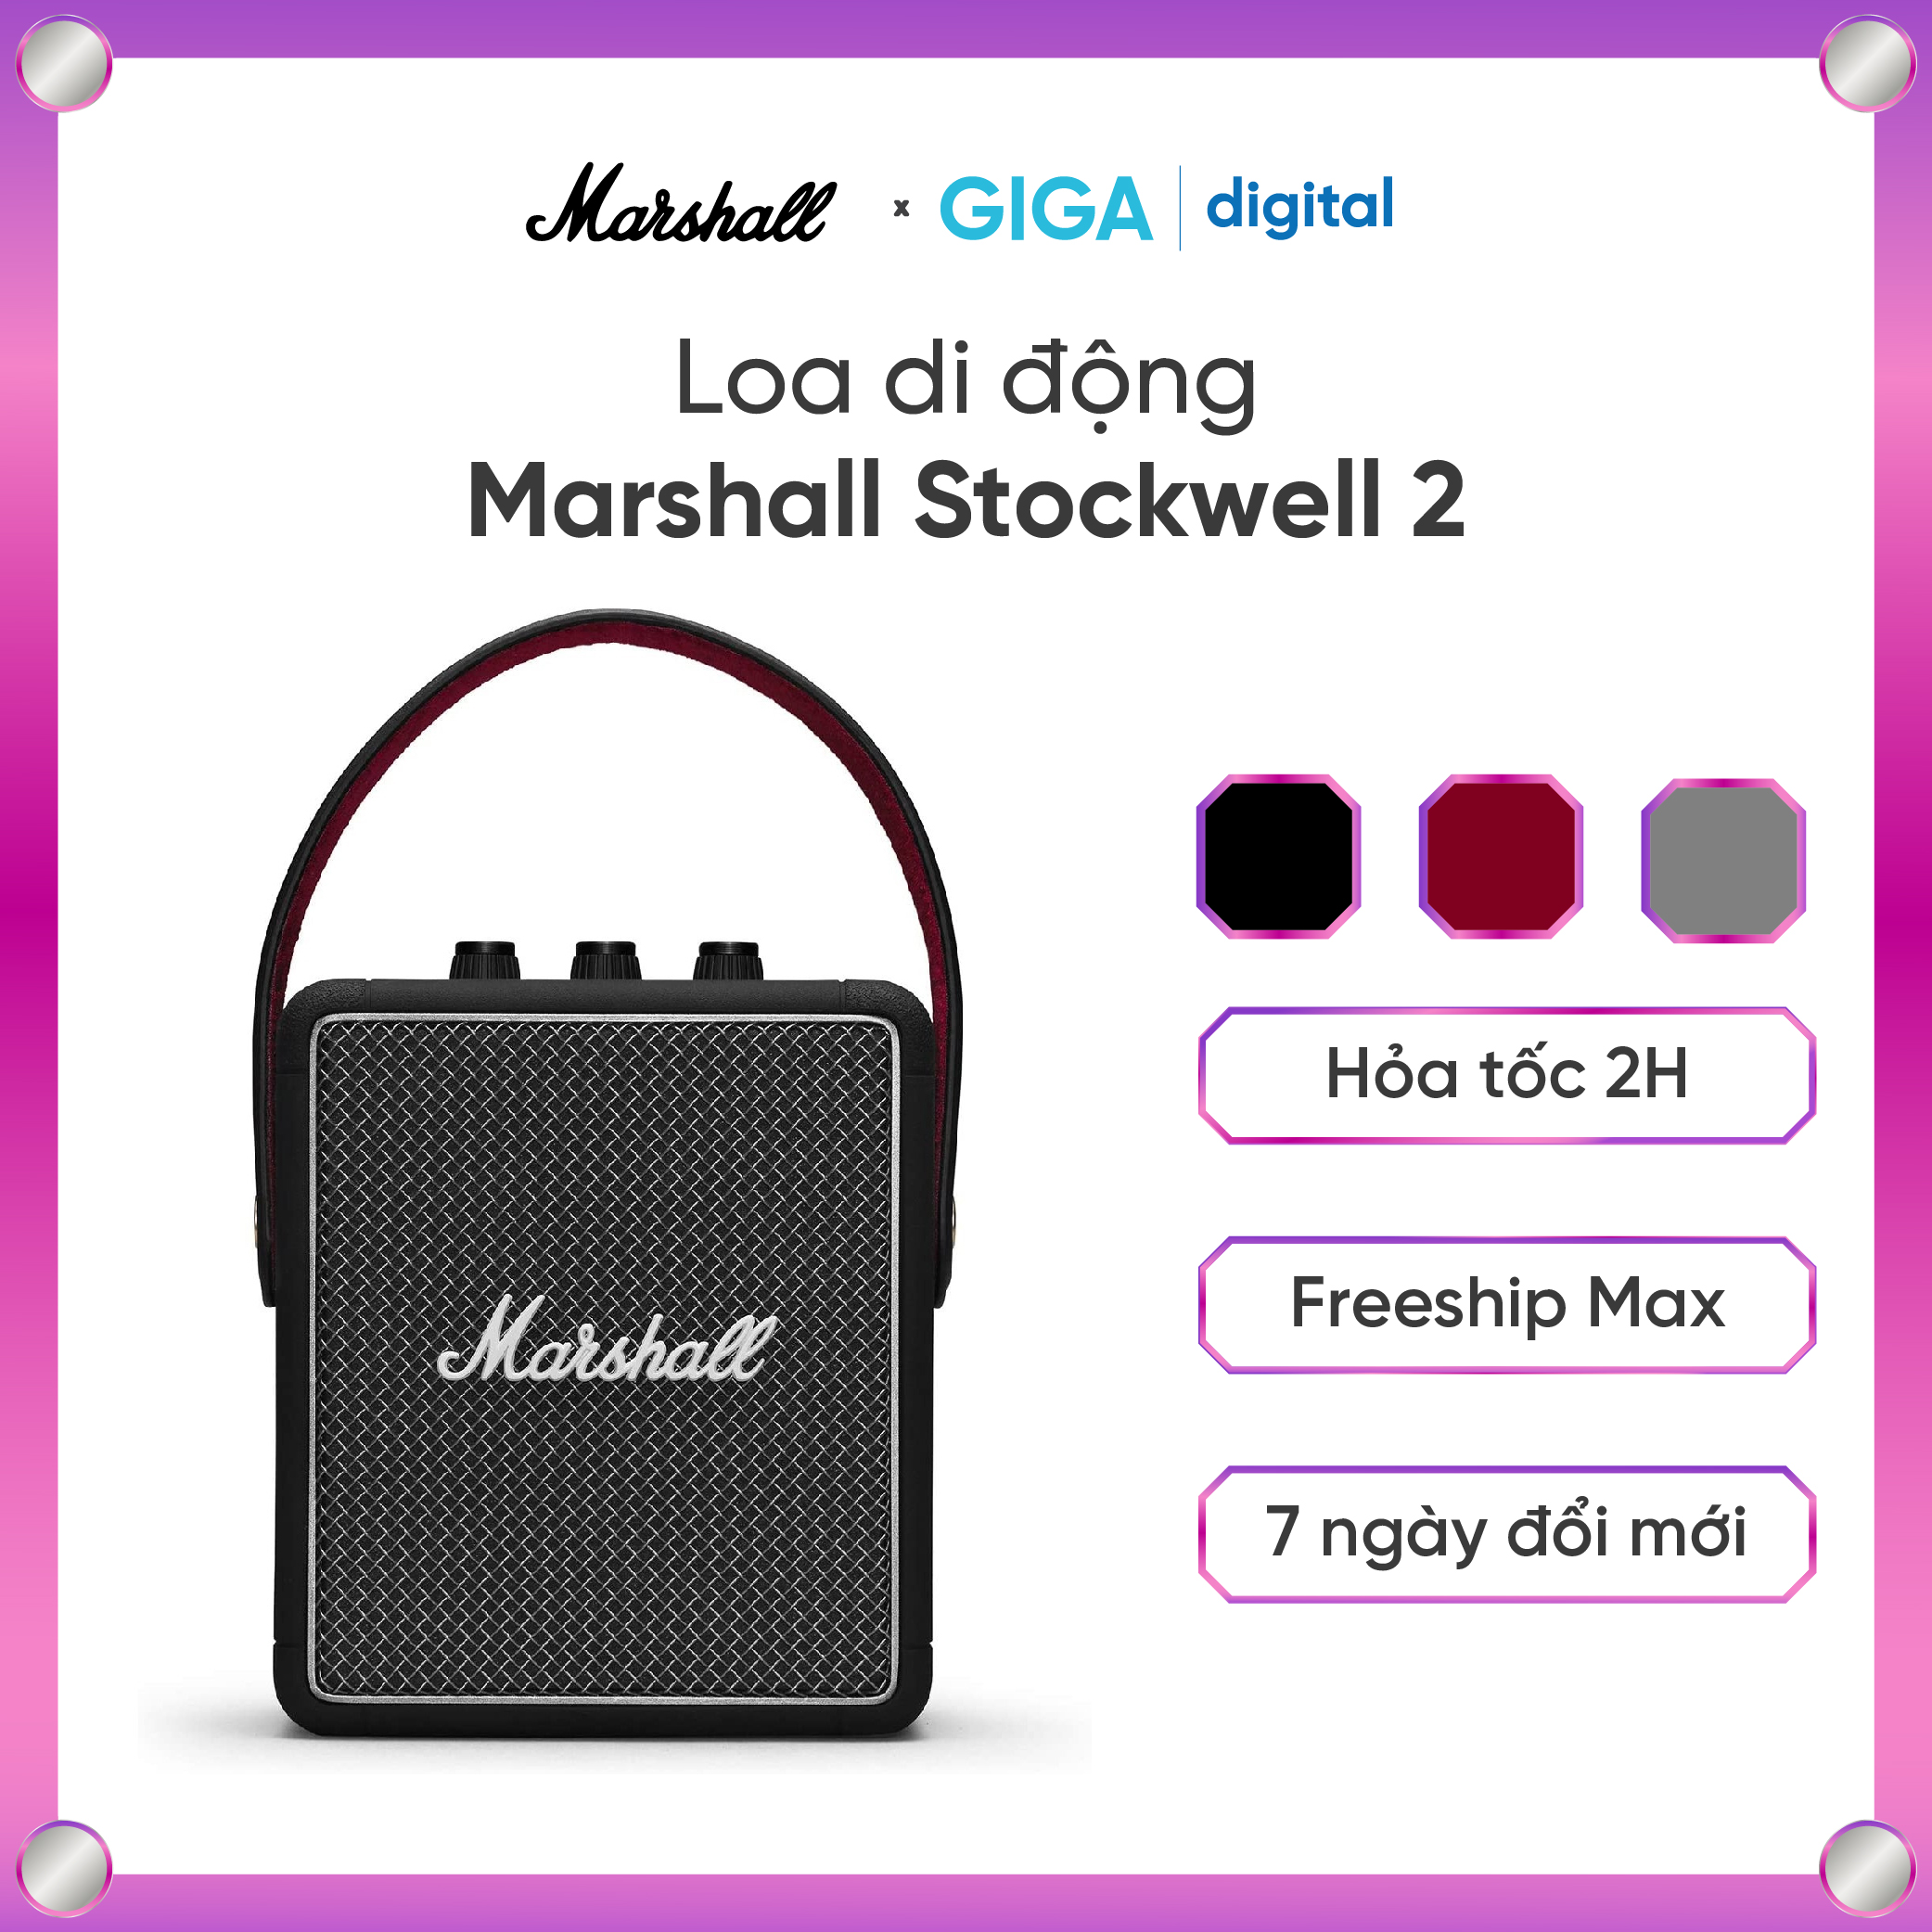 Loa di động Marshall Stockwell 2Authentic công suất 20W